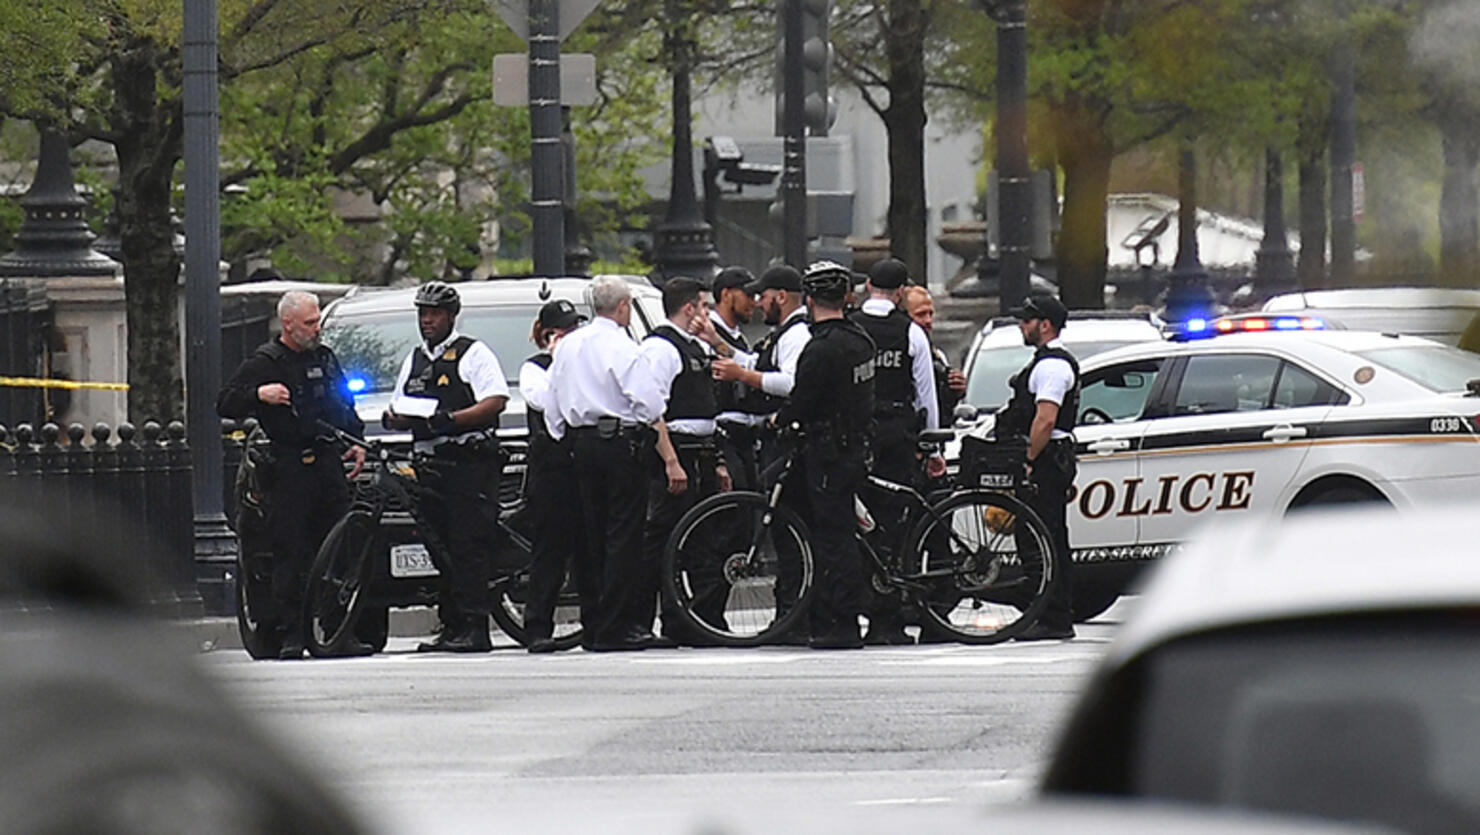 Secret Service Uniformed Division personnel secure the intercetion of 17th Street and Pennsylvania Avenue near the White House after a man reportedly tried to set himself on fire outside the presidential mansion